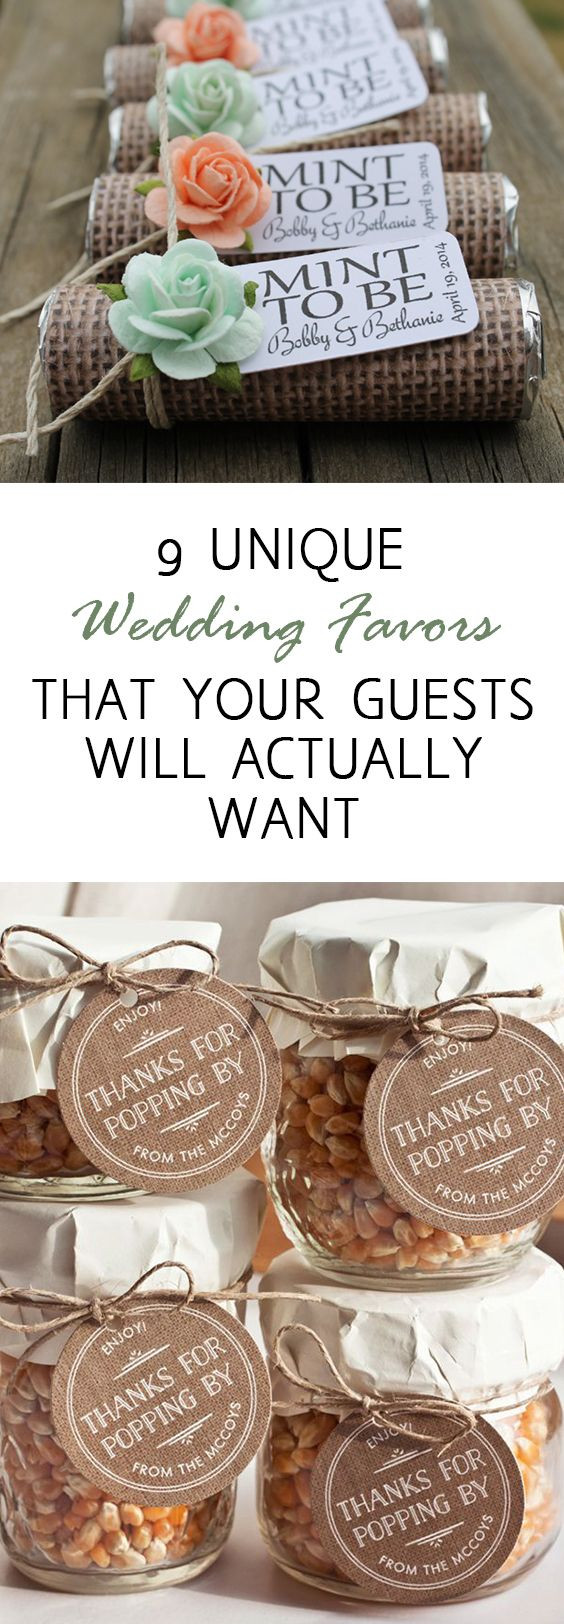 Cheap Diy Wedding Favors
 9 Unique Wedding Favors that Your Guests Will Actually